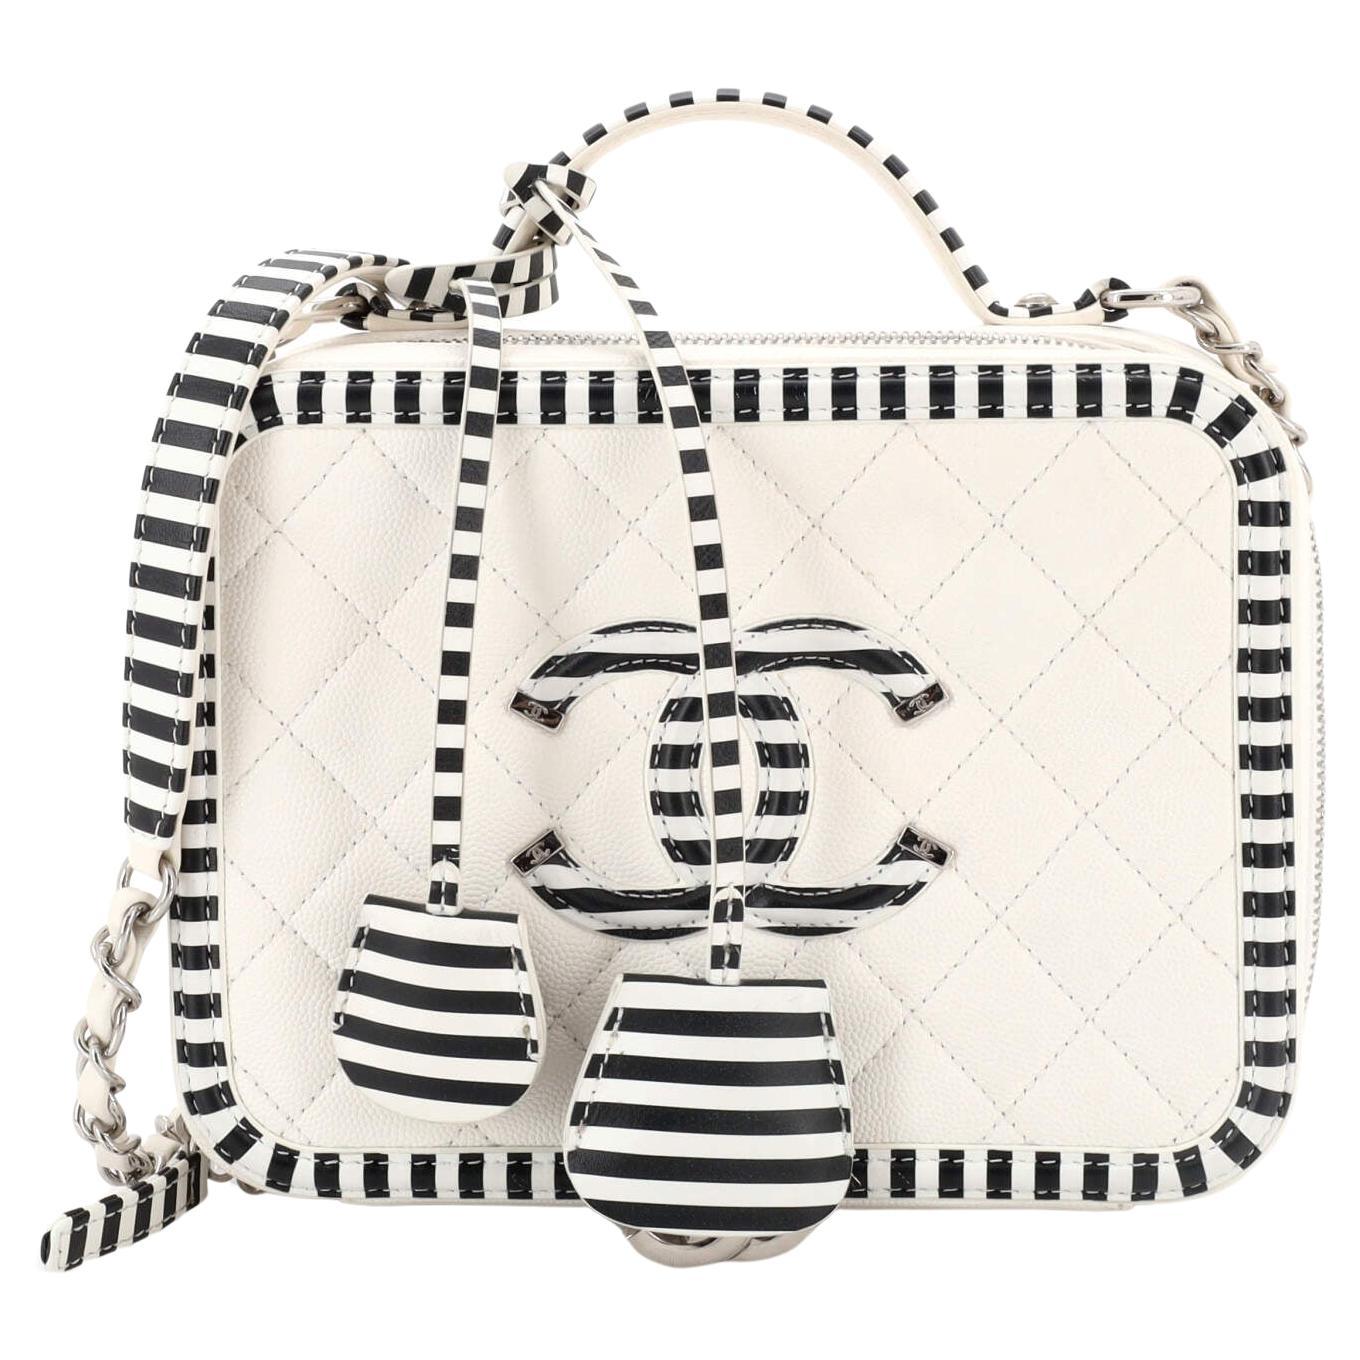 Chanel Filigree Vanity Case Quilted Caviar with Striped Leather Medium